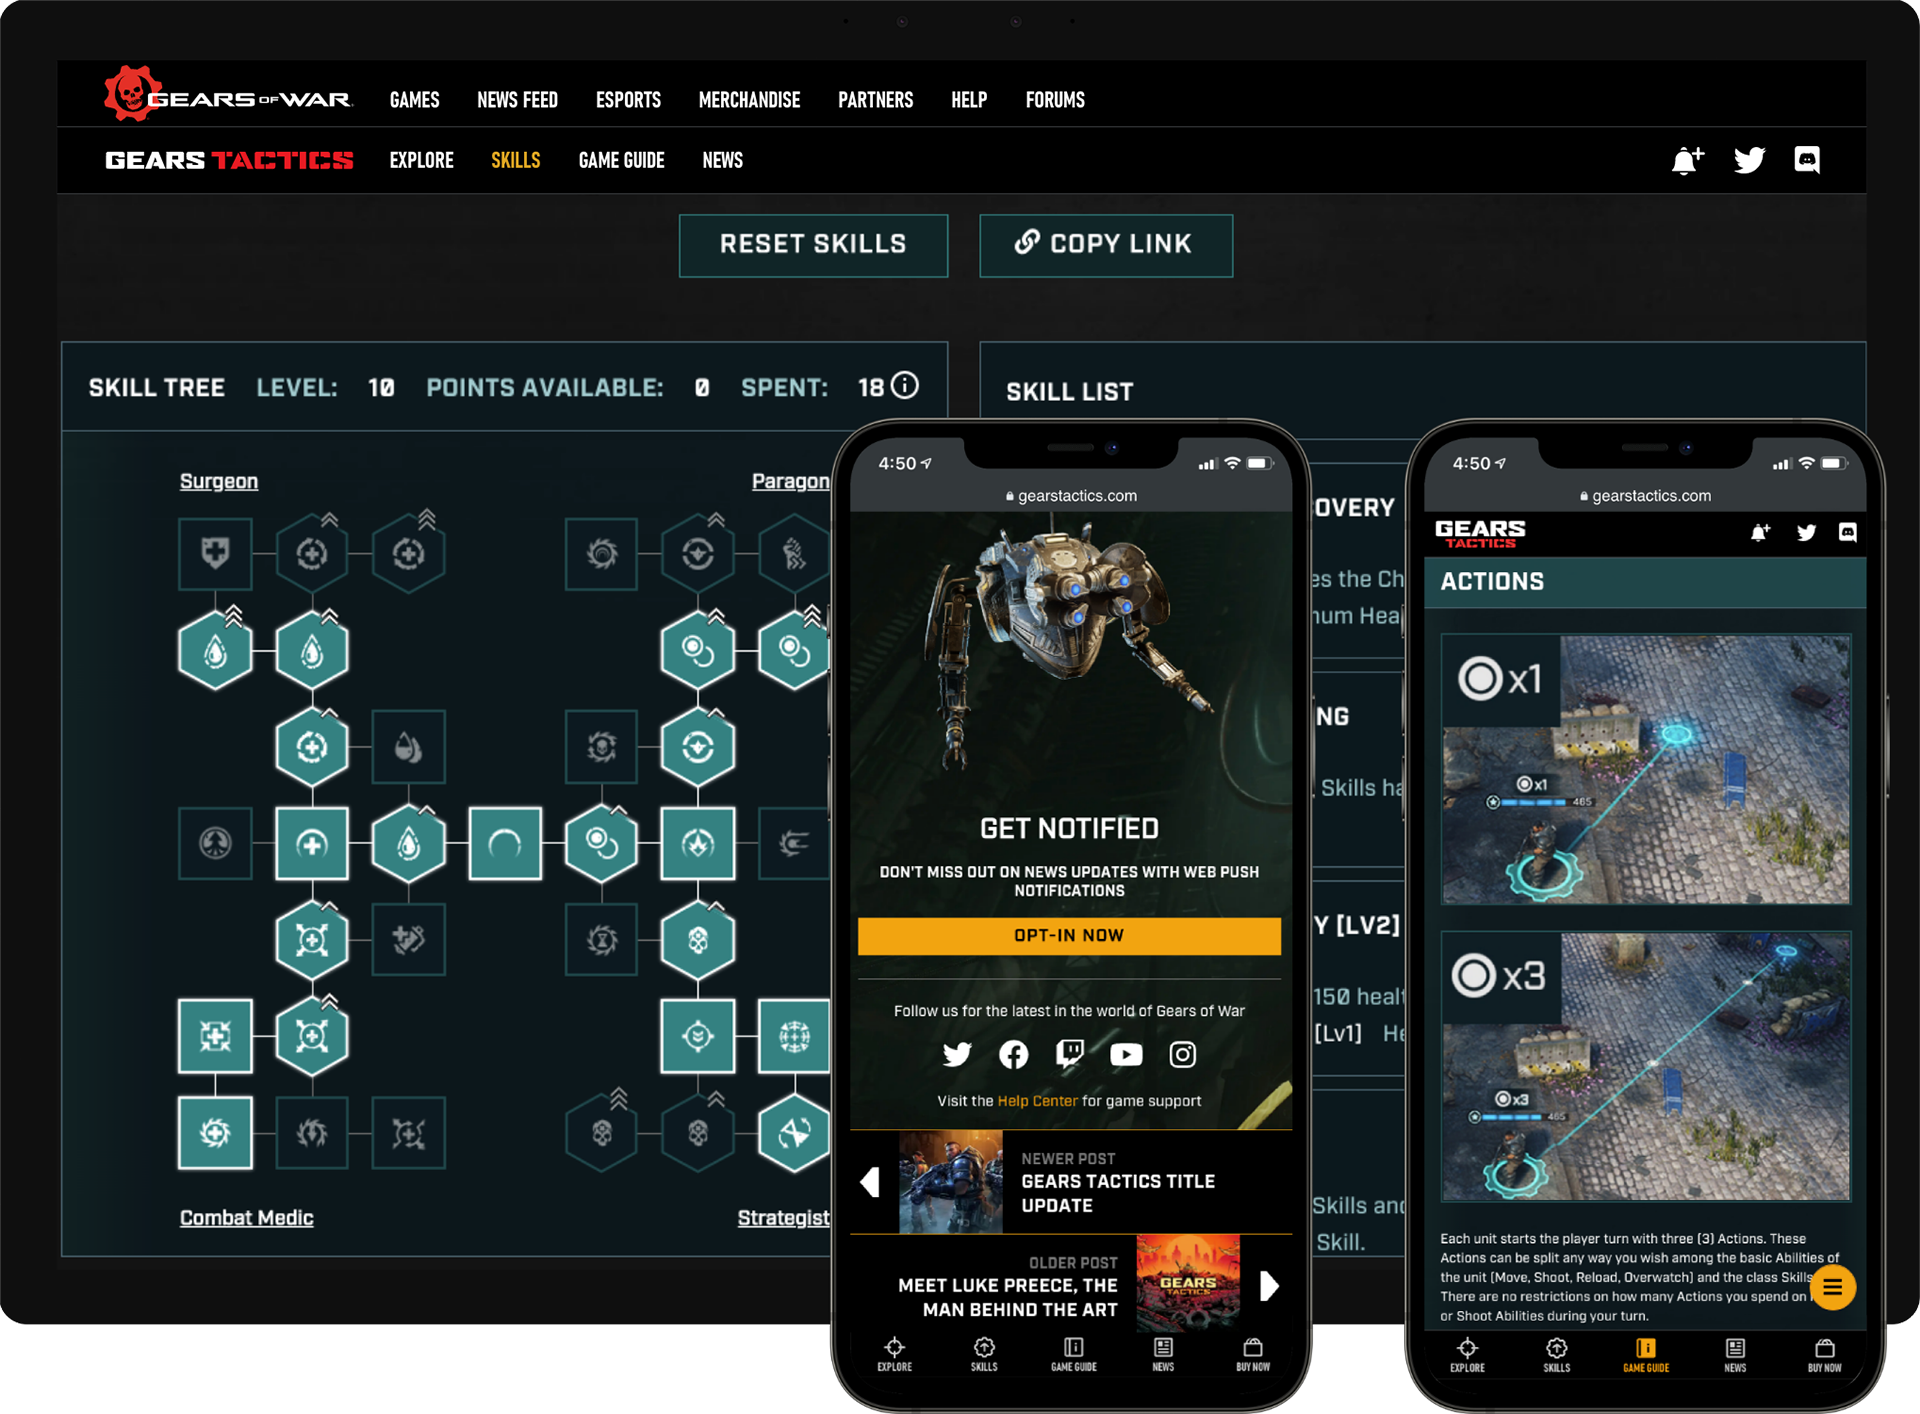 Gears Tactics Website Game Guide and Skill Planner